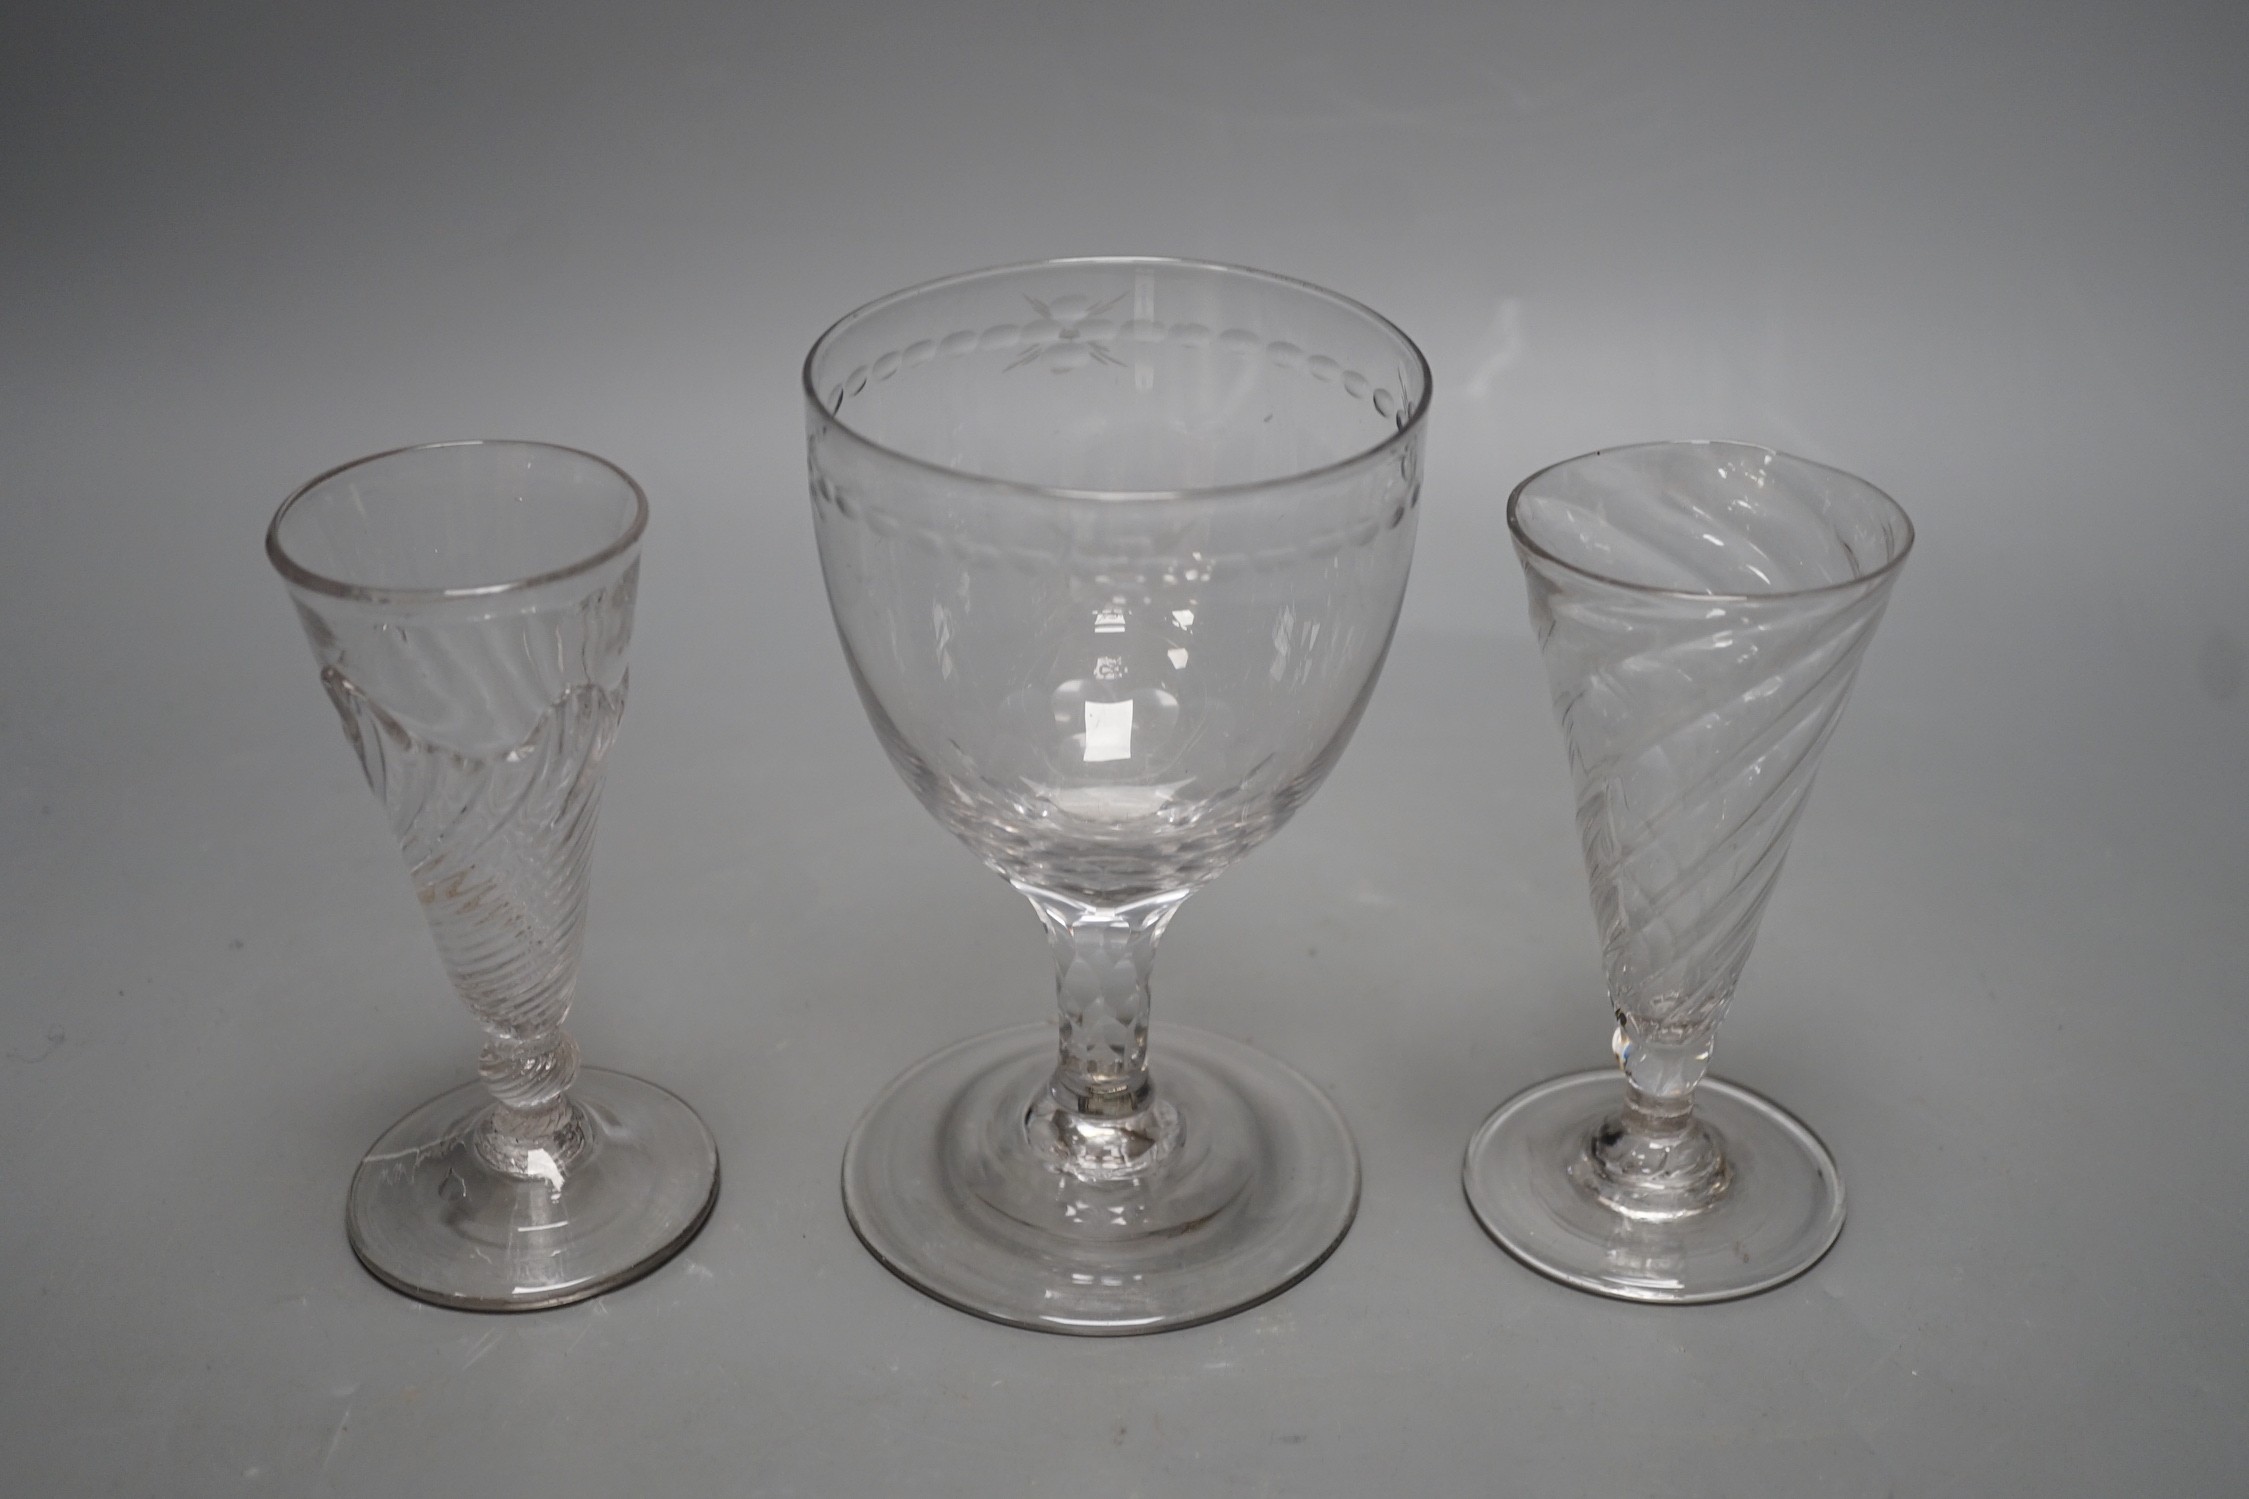 Two wrythen ale flutes, 18th century and a facet stem ‘OXO’ glass rummer, tallest 15cms high